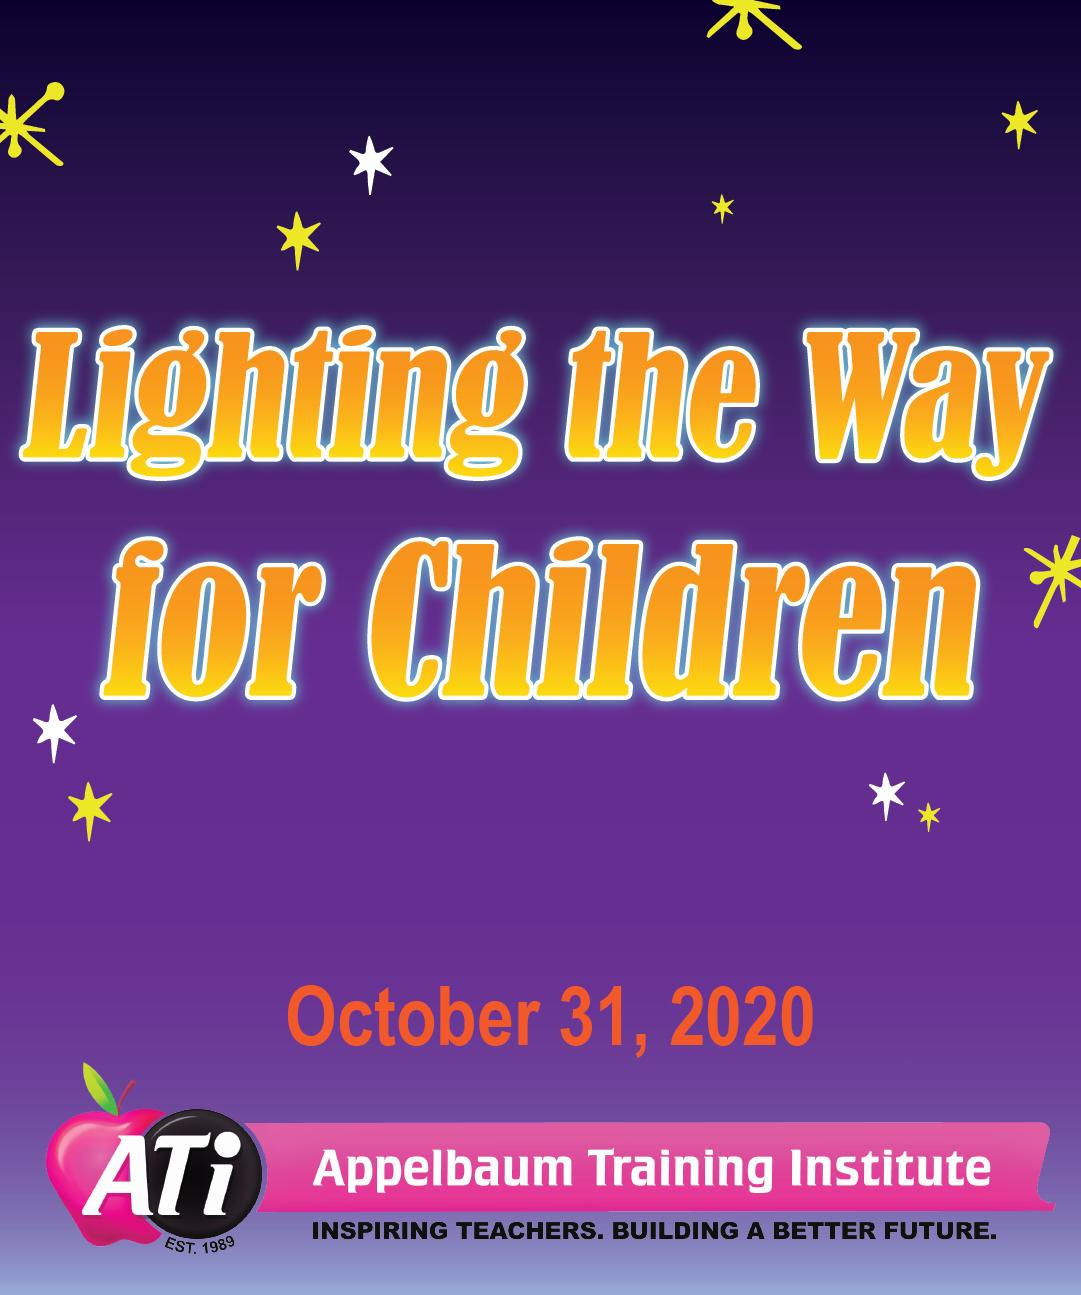 Image for Lighting the Way for Children